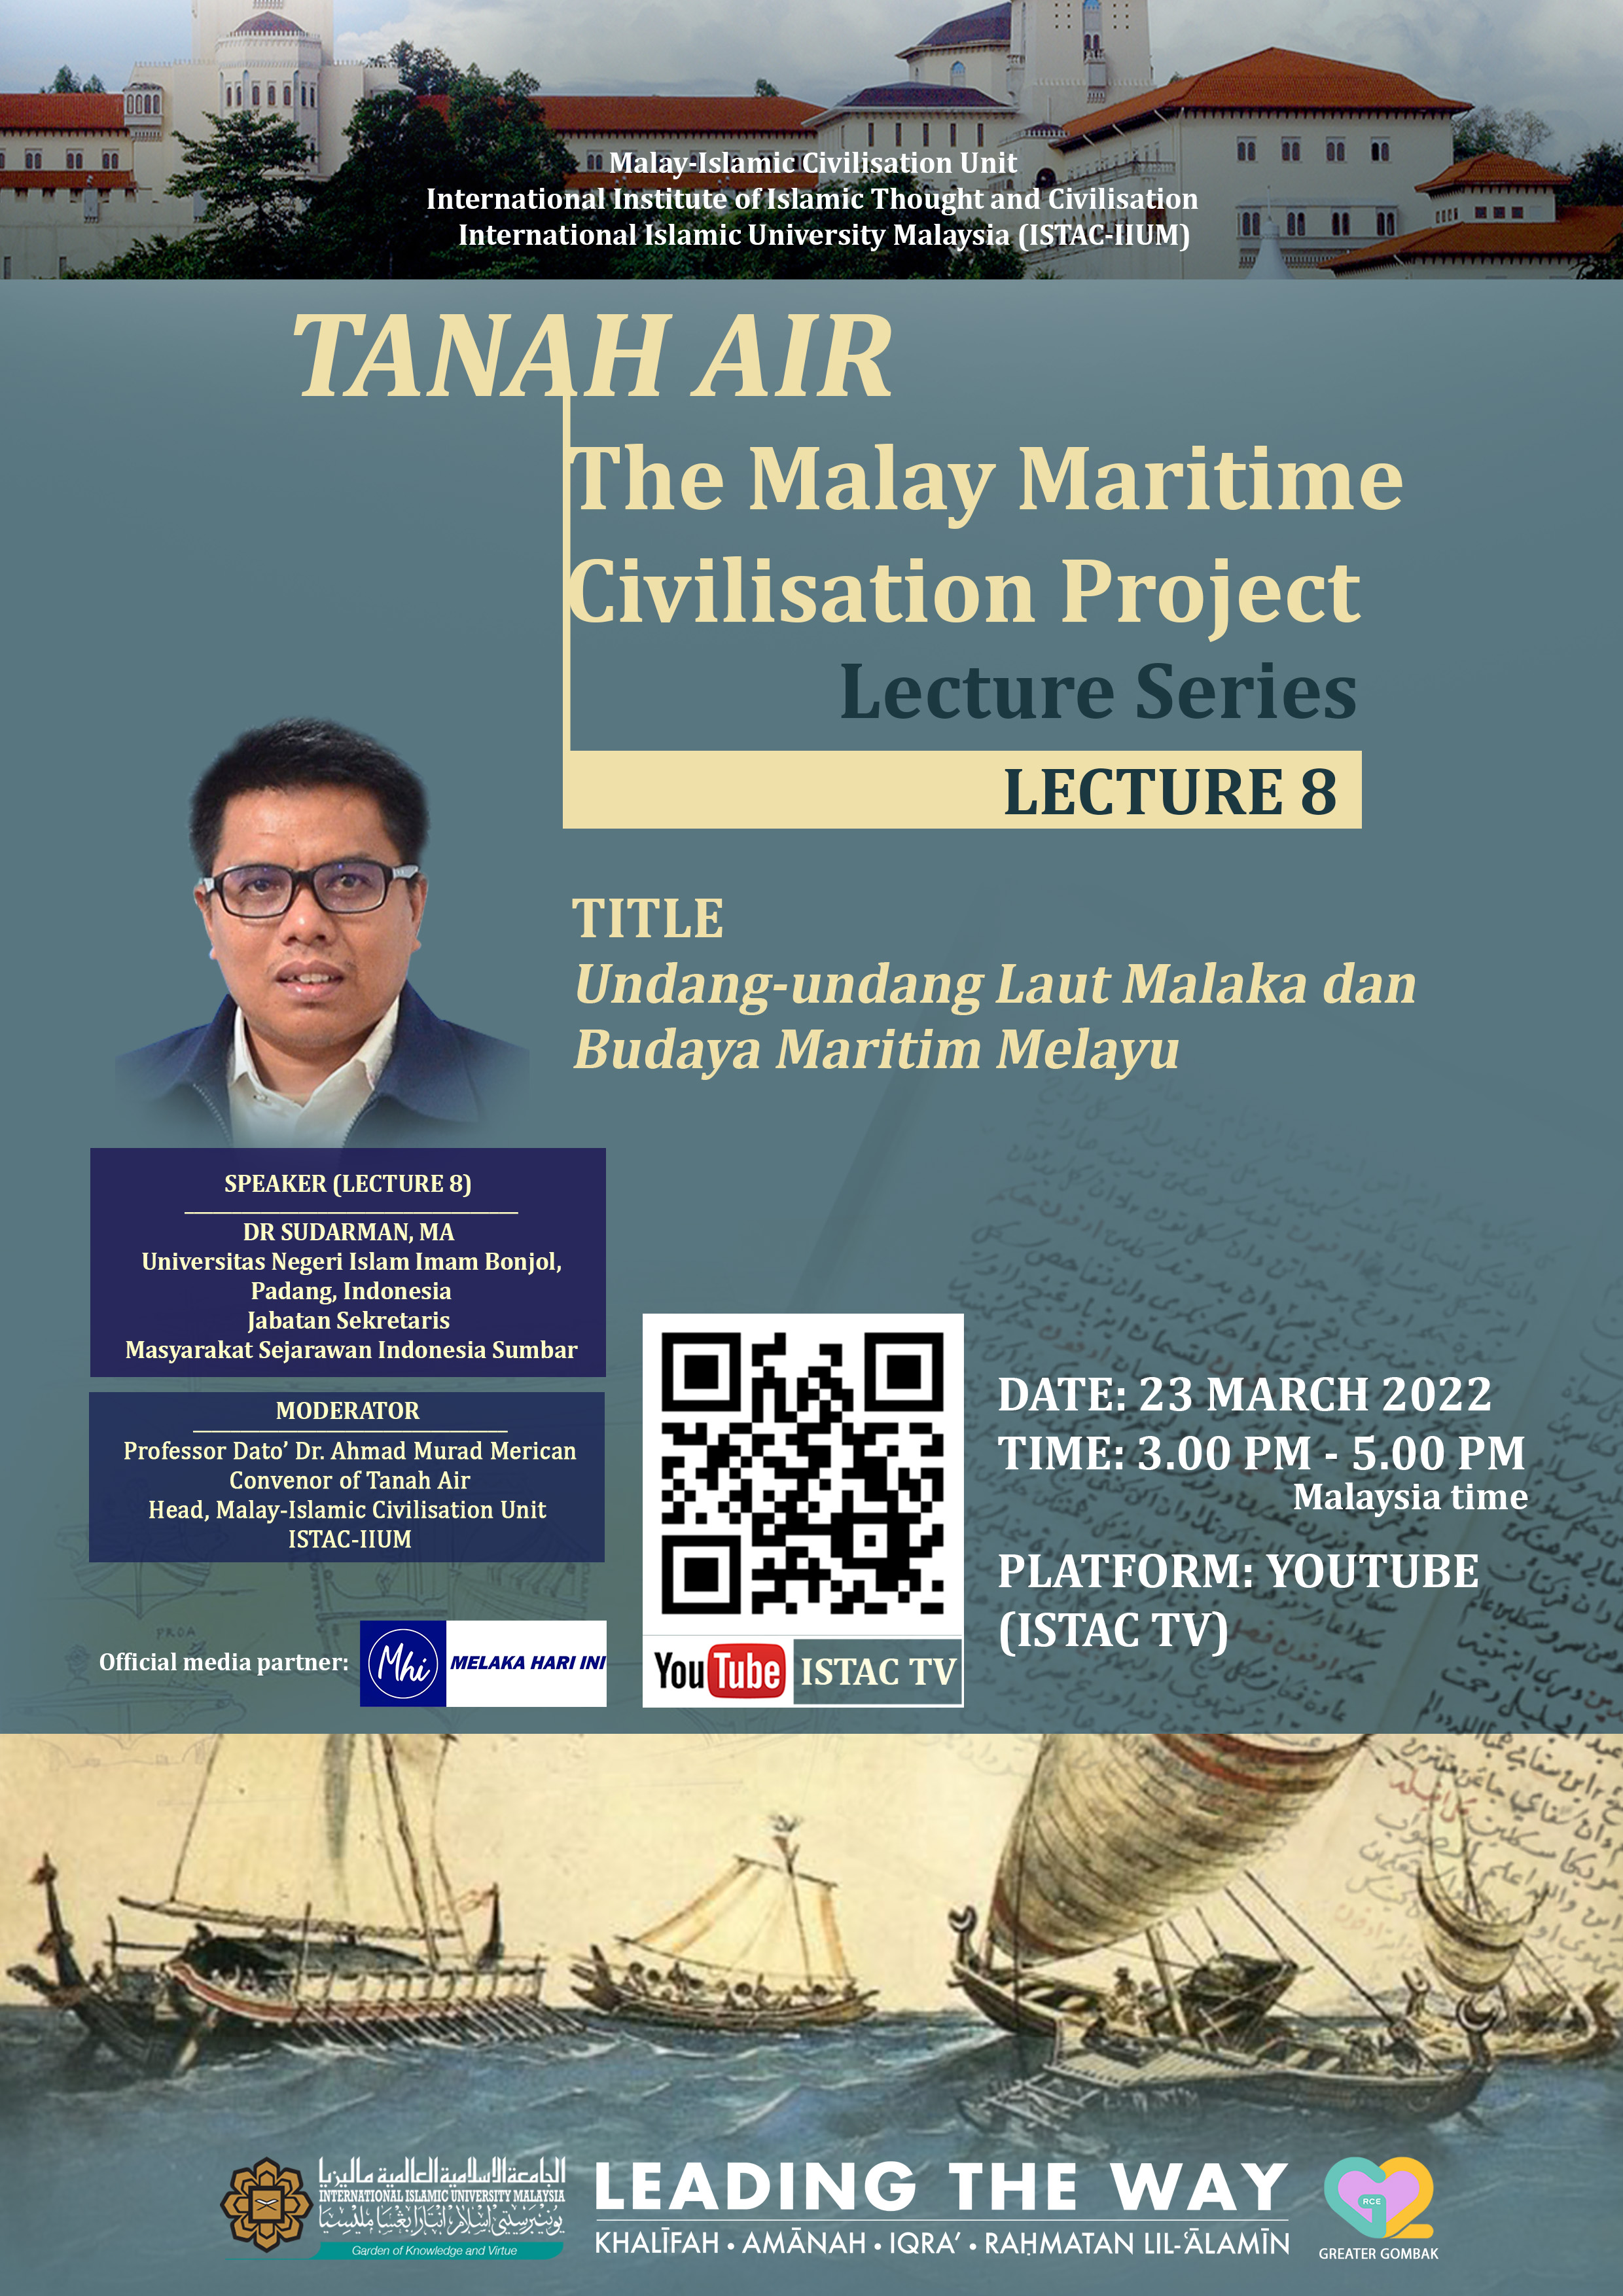 TANAH AIR: THE MALAY MARITIME CIVILISATION PROJECT EIGHTH LECTURE 